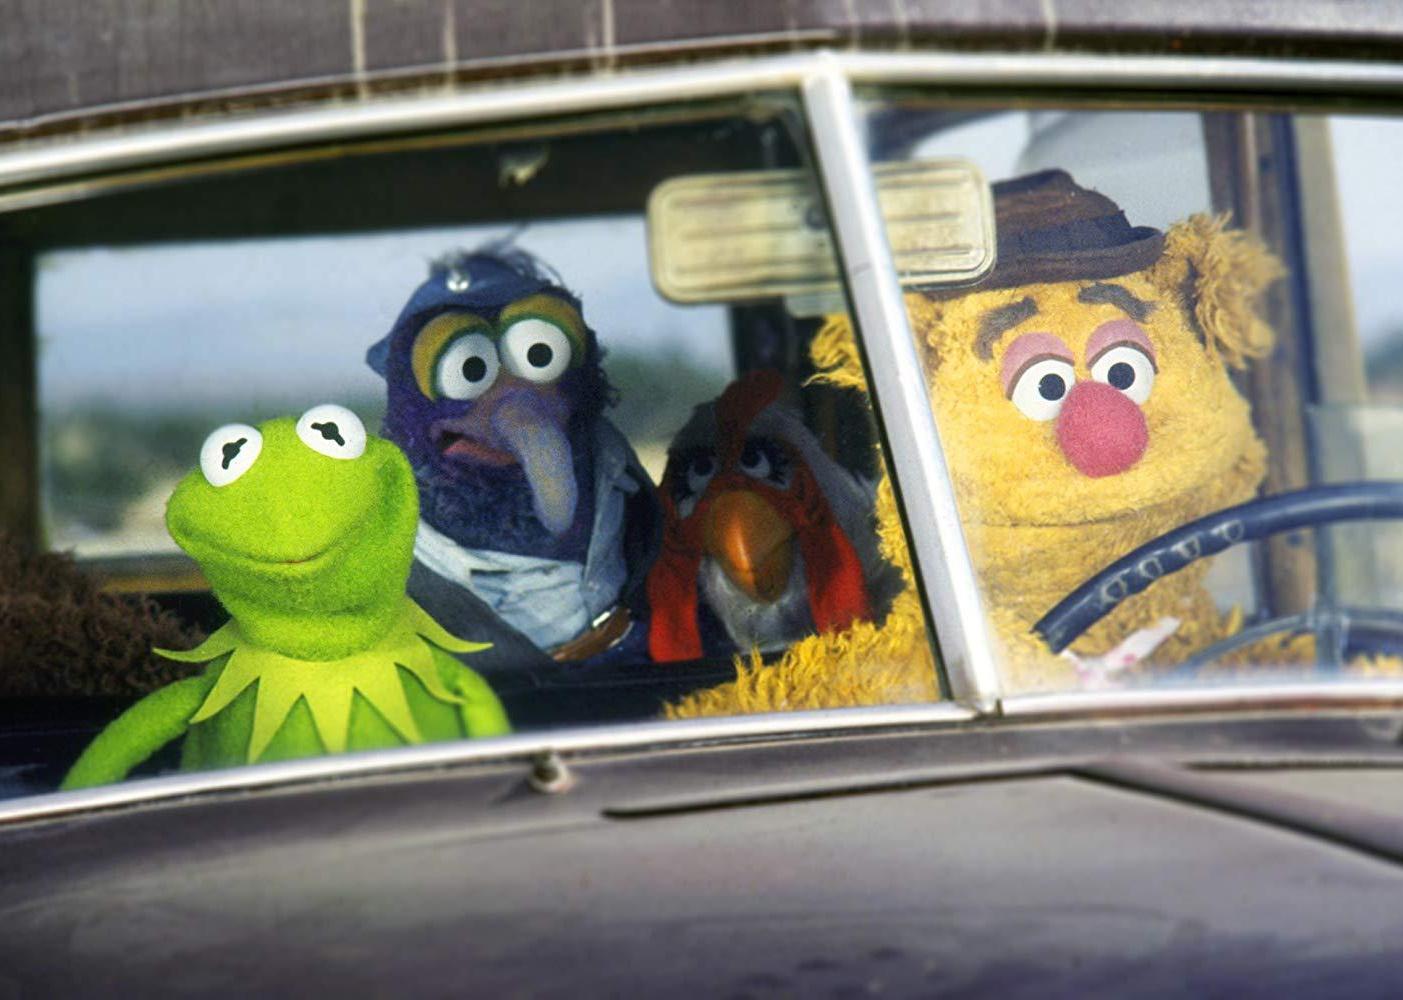 Muppets driving in a car.